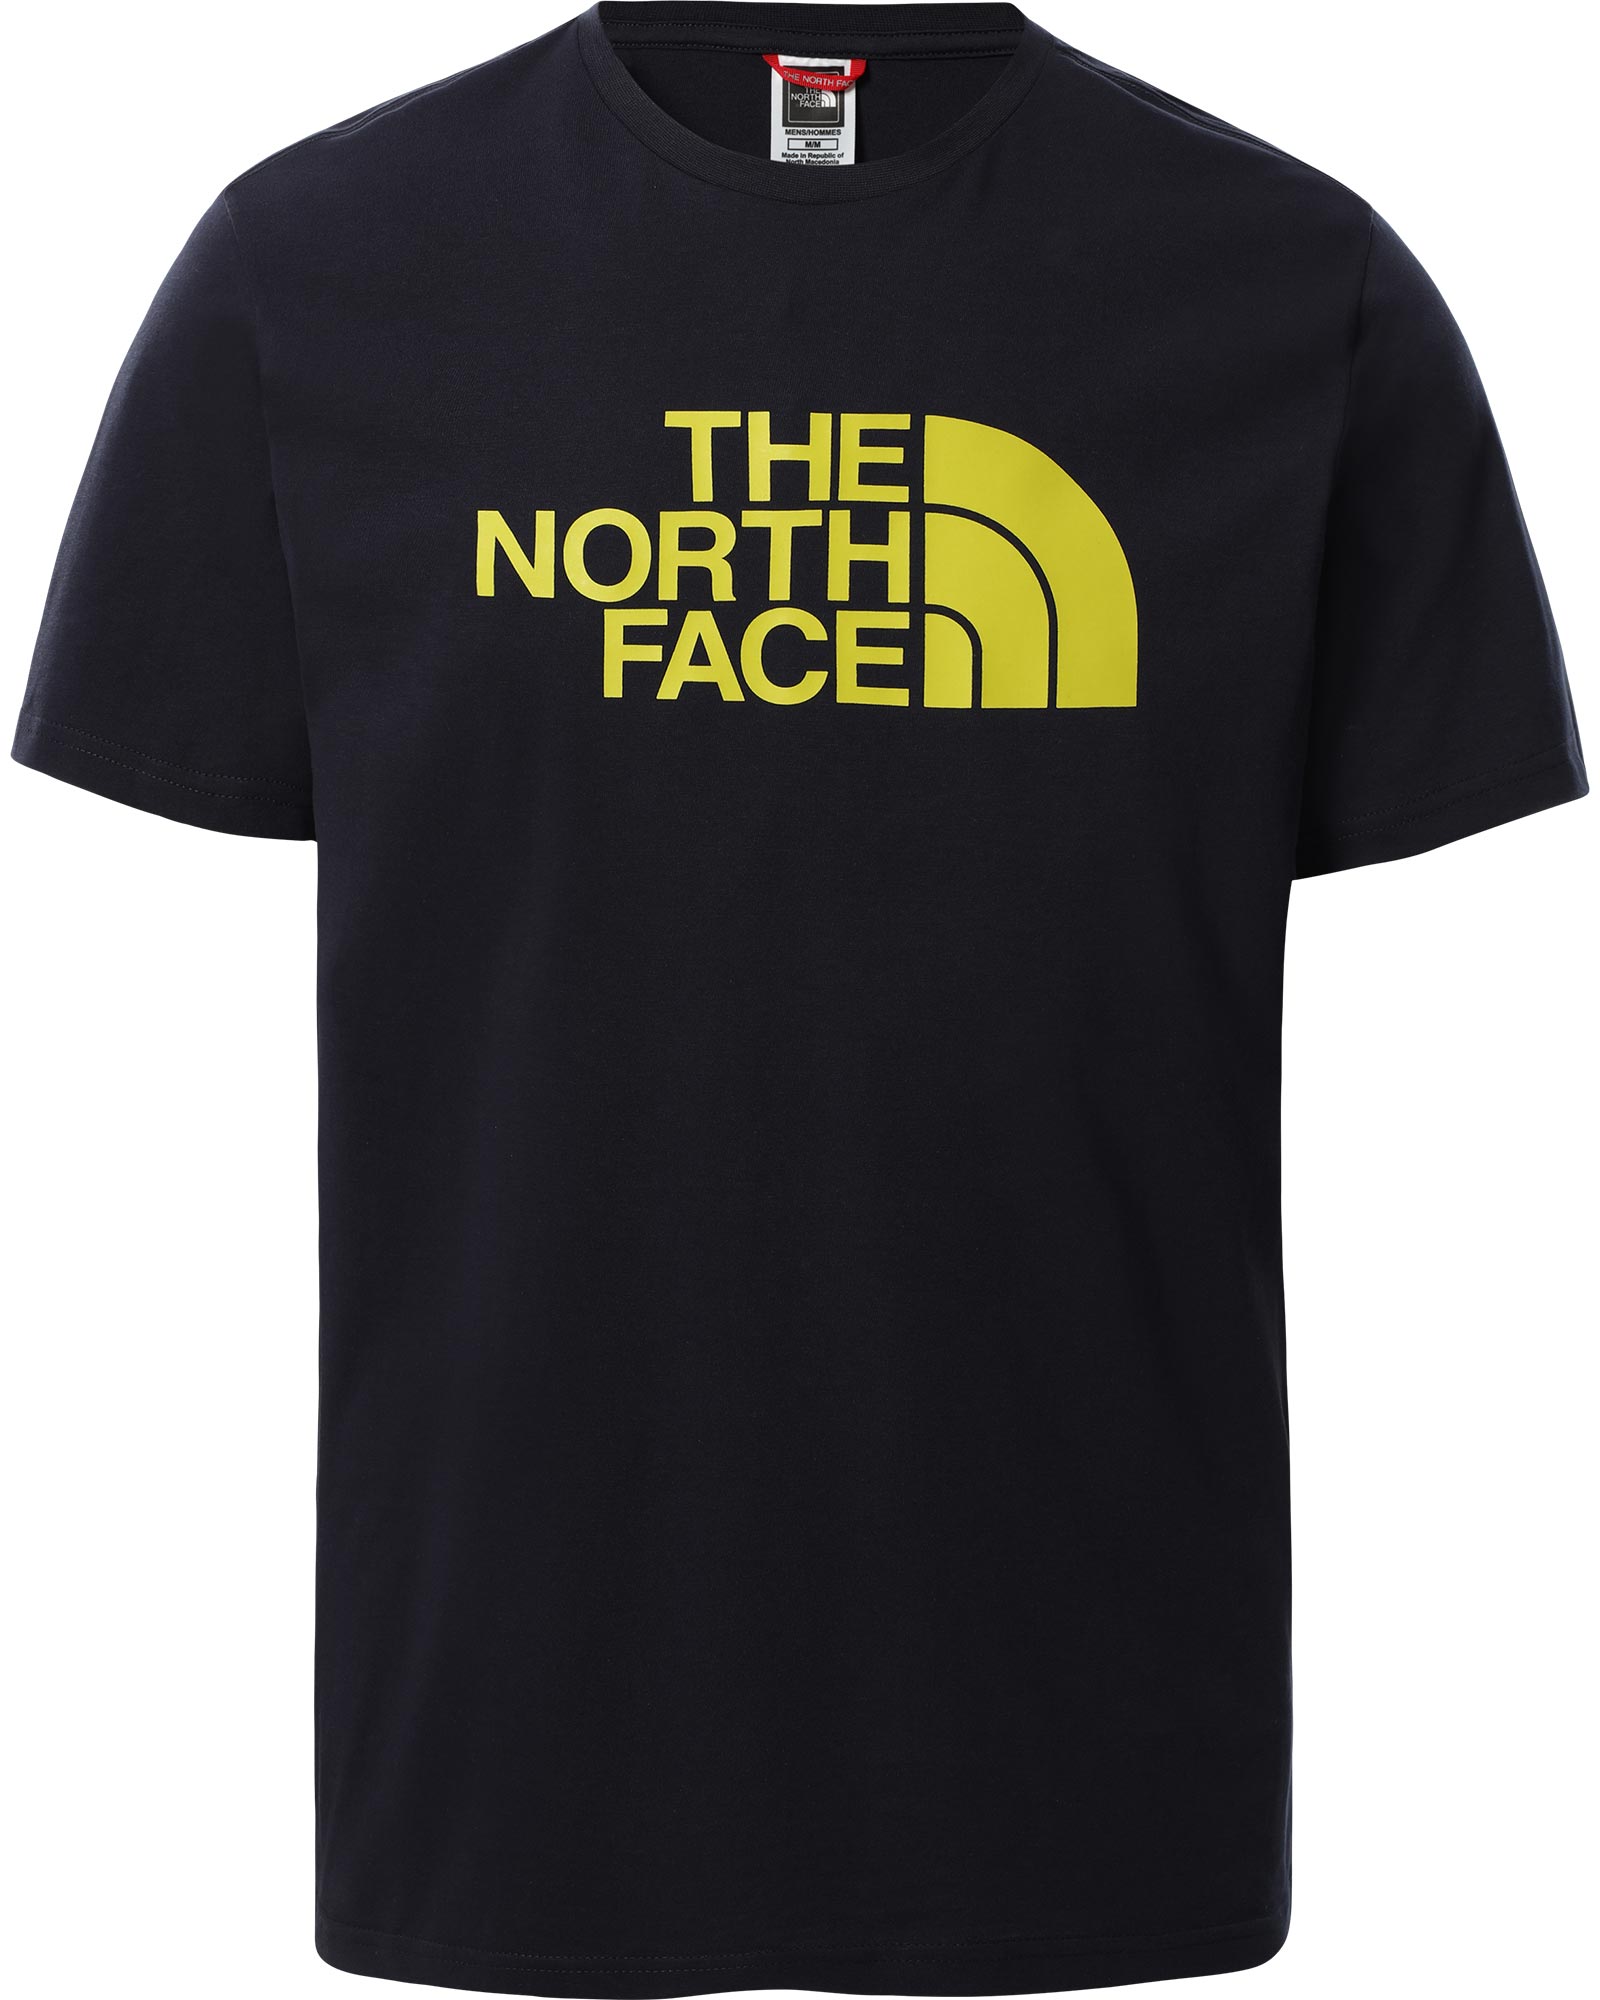 The North Face Easy Men’s T Shirt - Aviator Navy XS